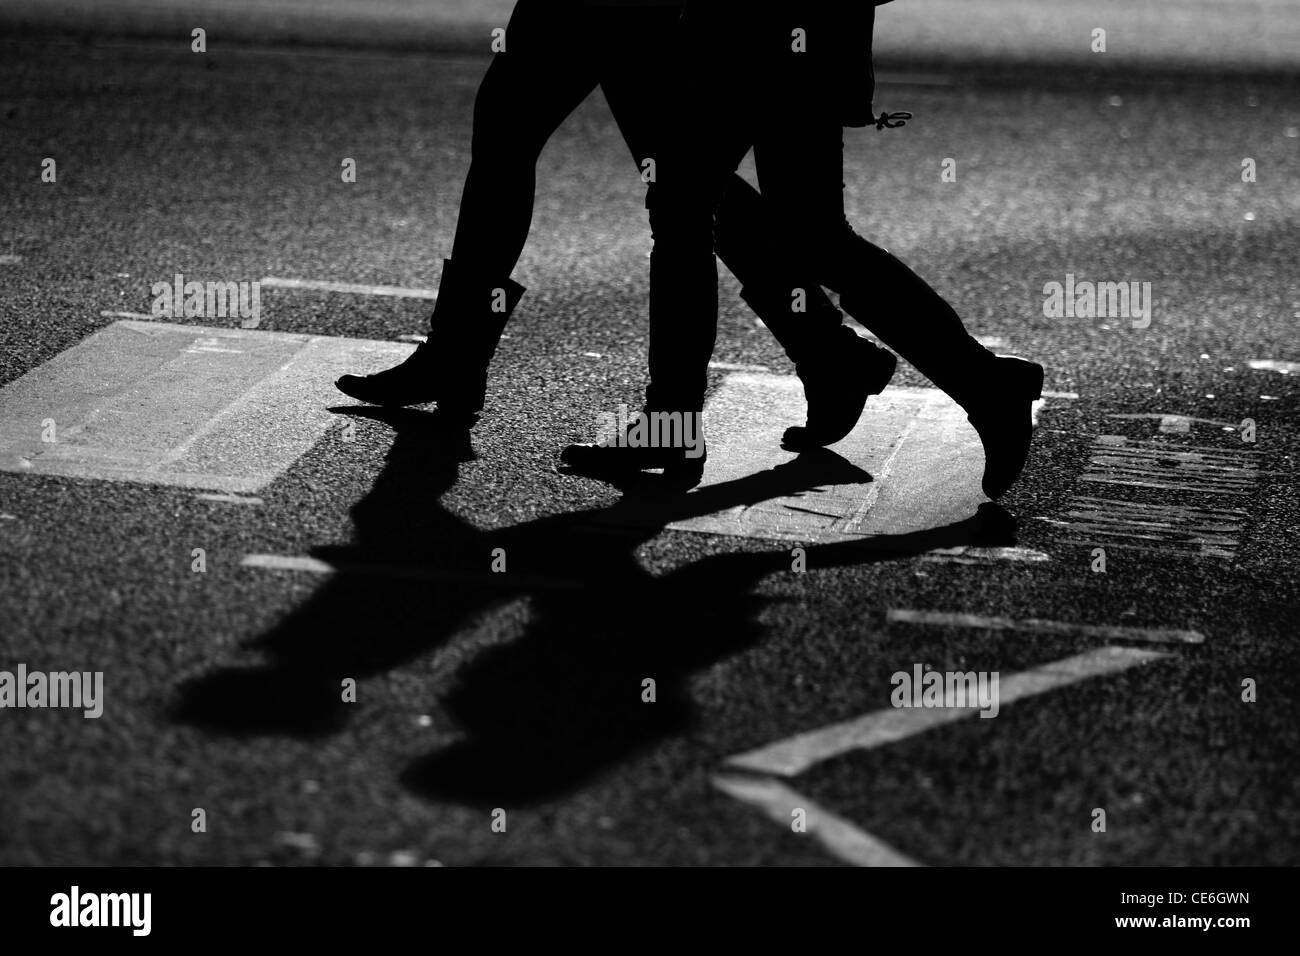 The legs of two females as they cross a road at a zebra crossing Stock Photo